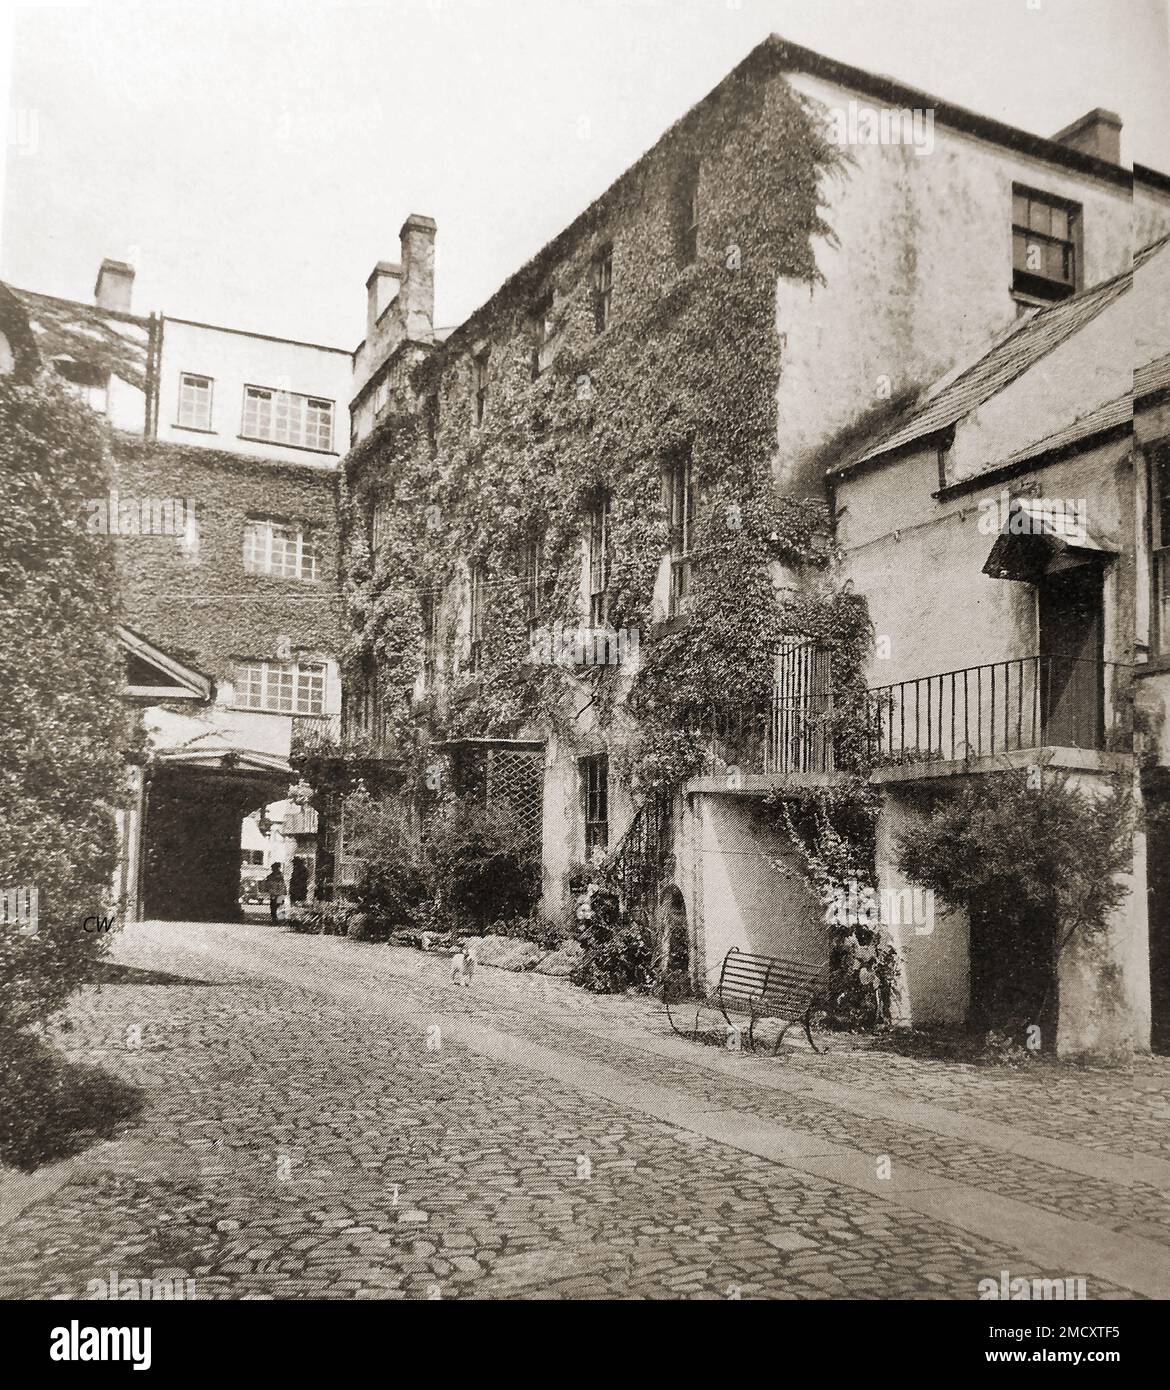 Circa 1940 of the coach yard at the Beaufort Arms, Monmouth, Wales originally a former coaching inn dating from the early eighteenth century,  A 2005 episode of the  television series Doctor Who, 'The Unquiet Dead', was filmed in the courtyard. Stock Photo